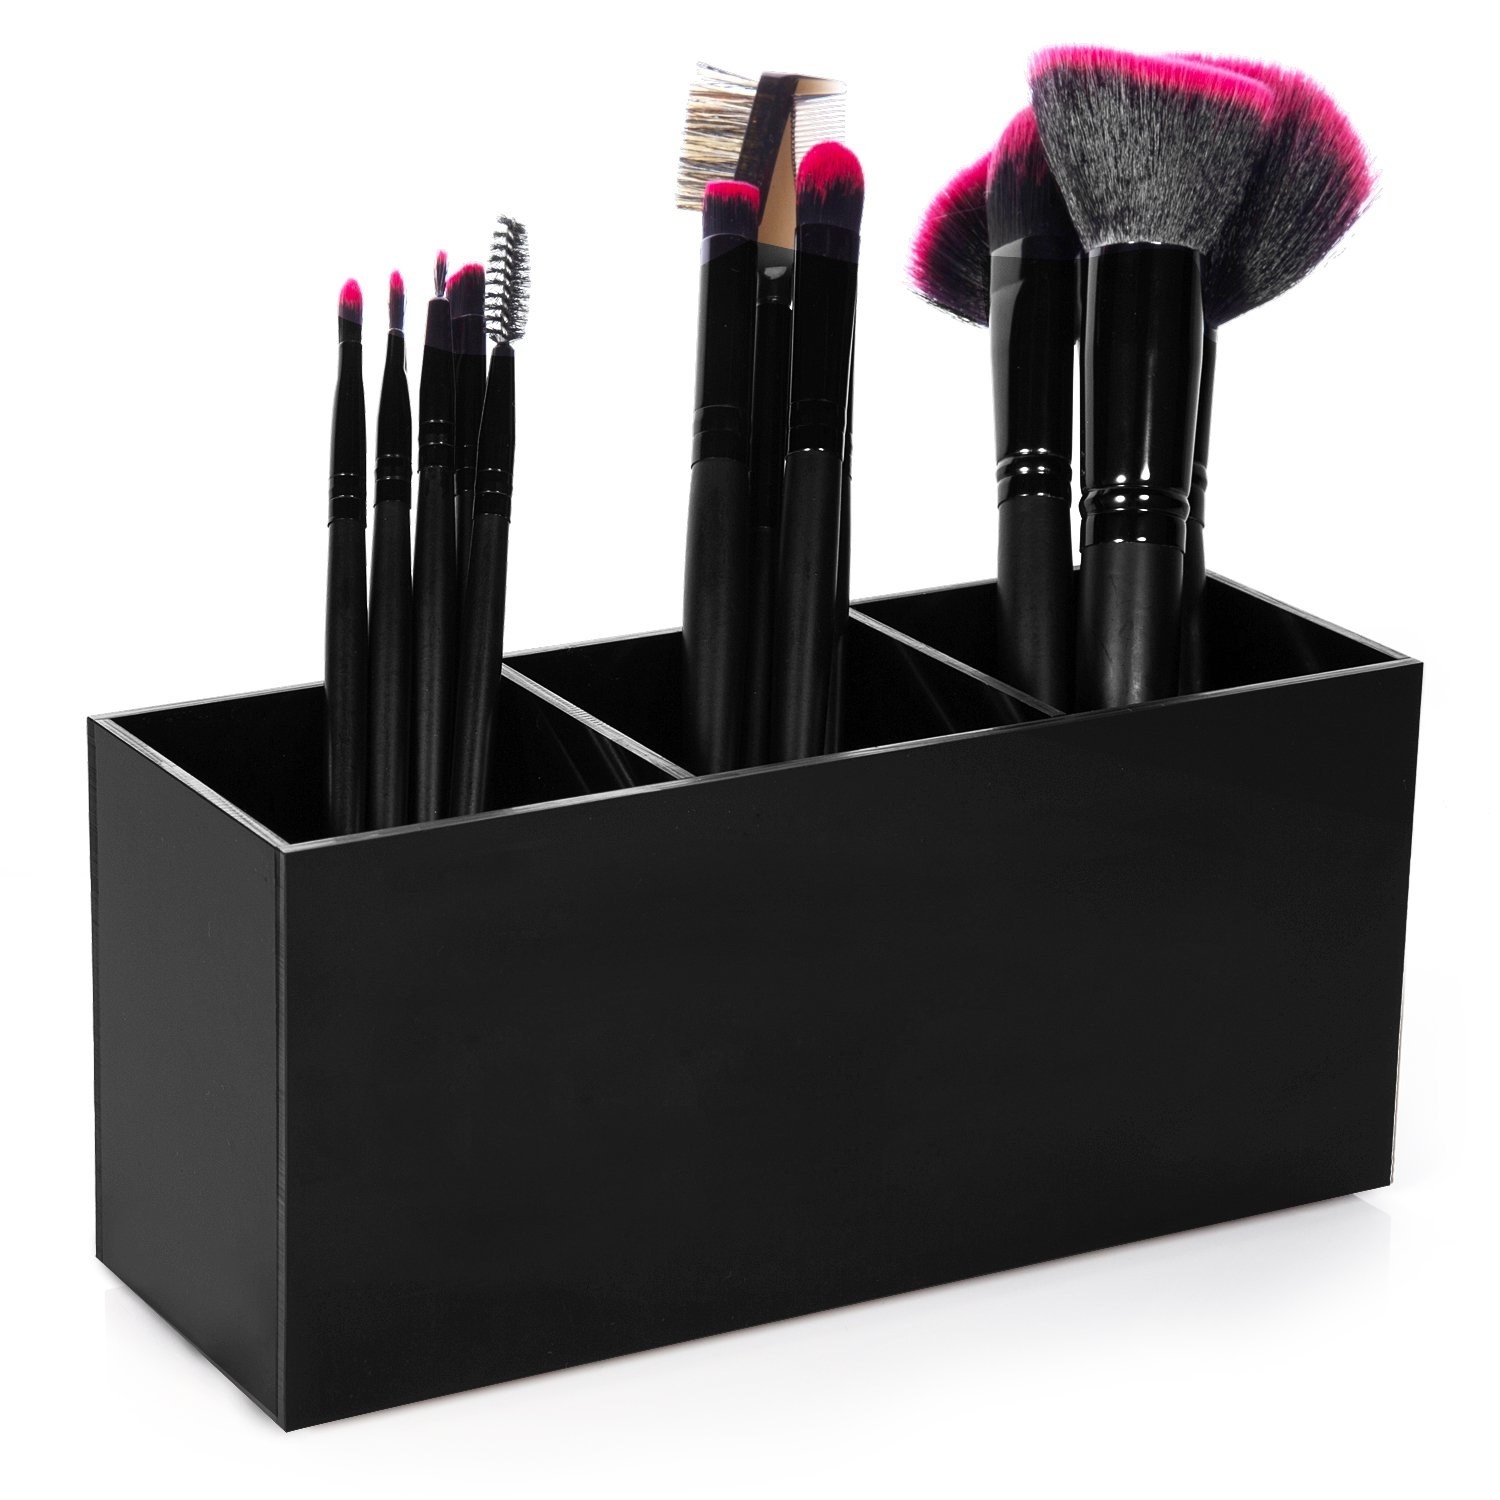 The holder in black with several brushes in each slot